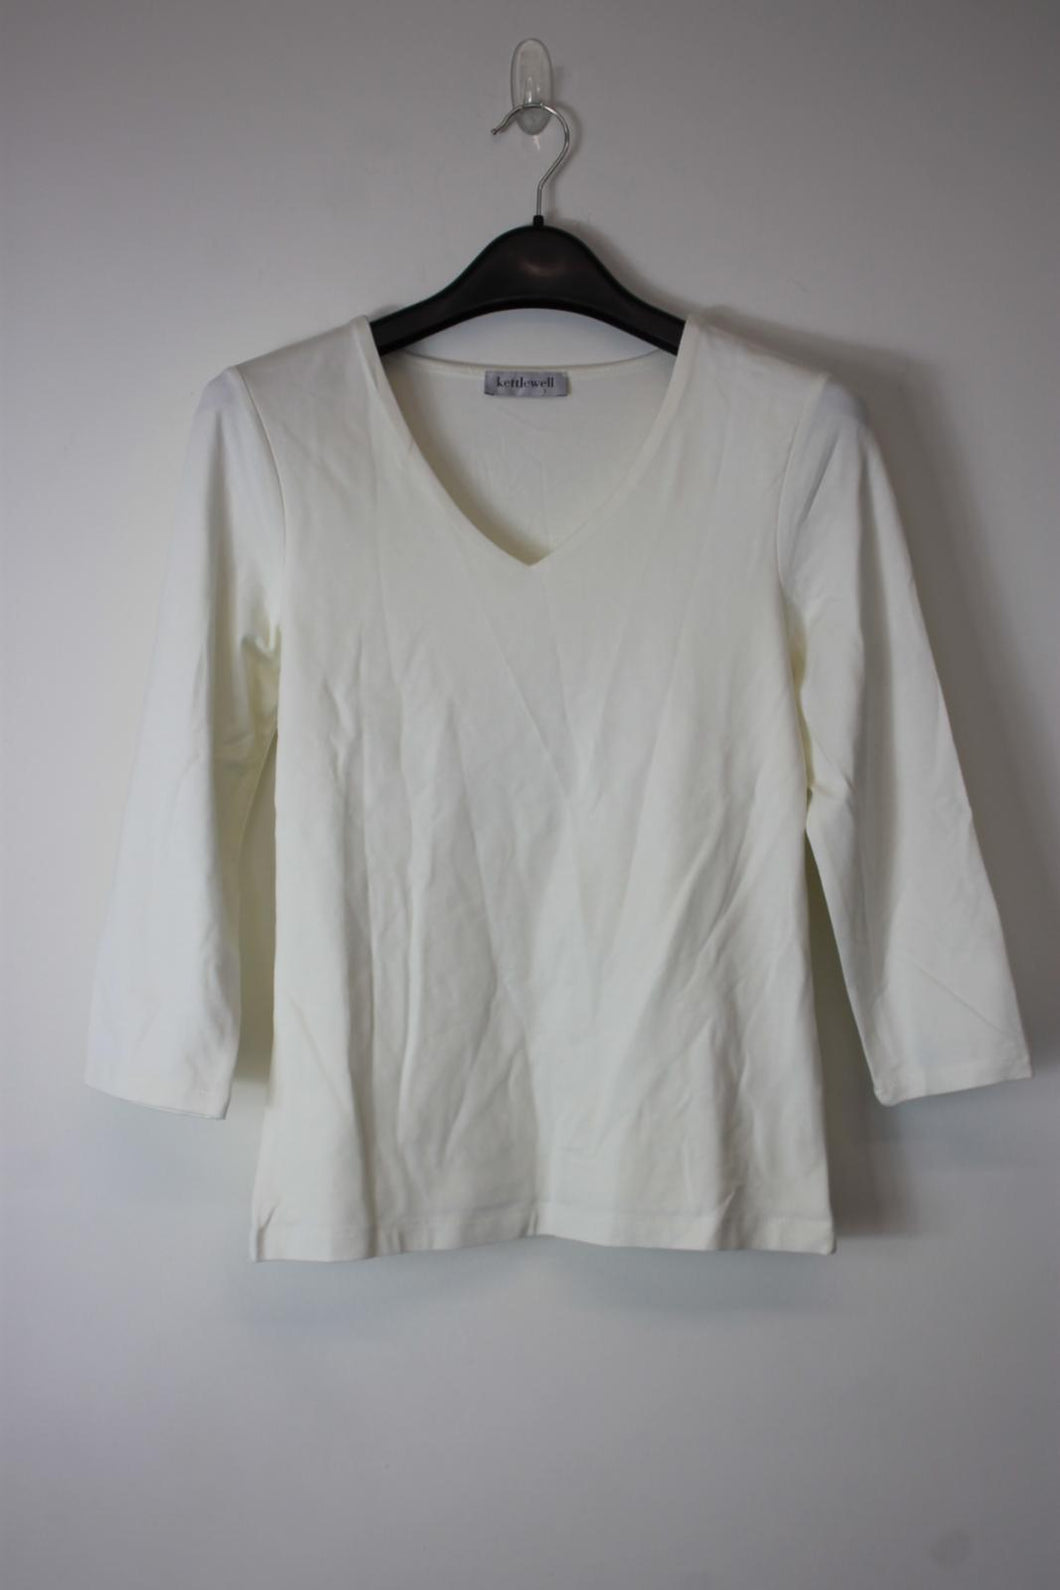 KETTLEWELL Ladies White Cotton Long Sleeve V-Neck Top Size S